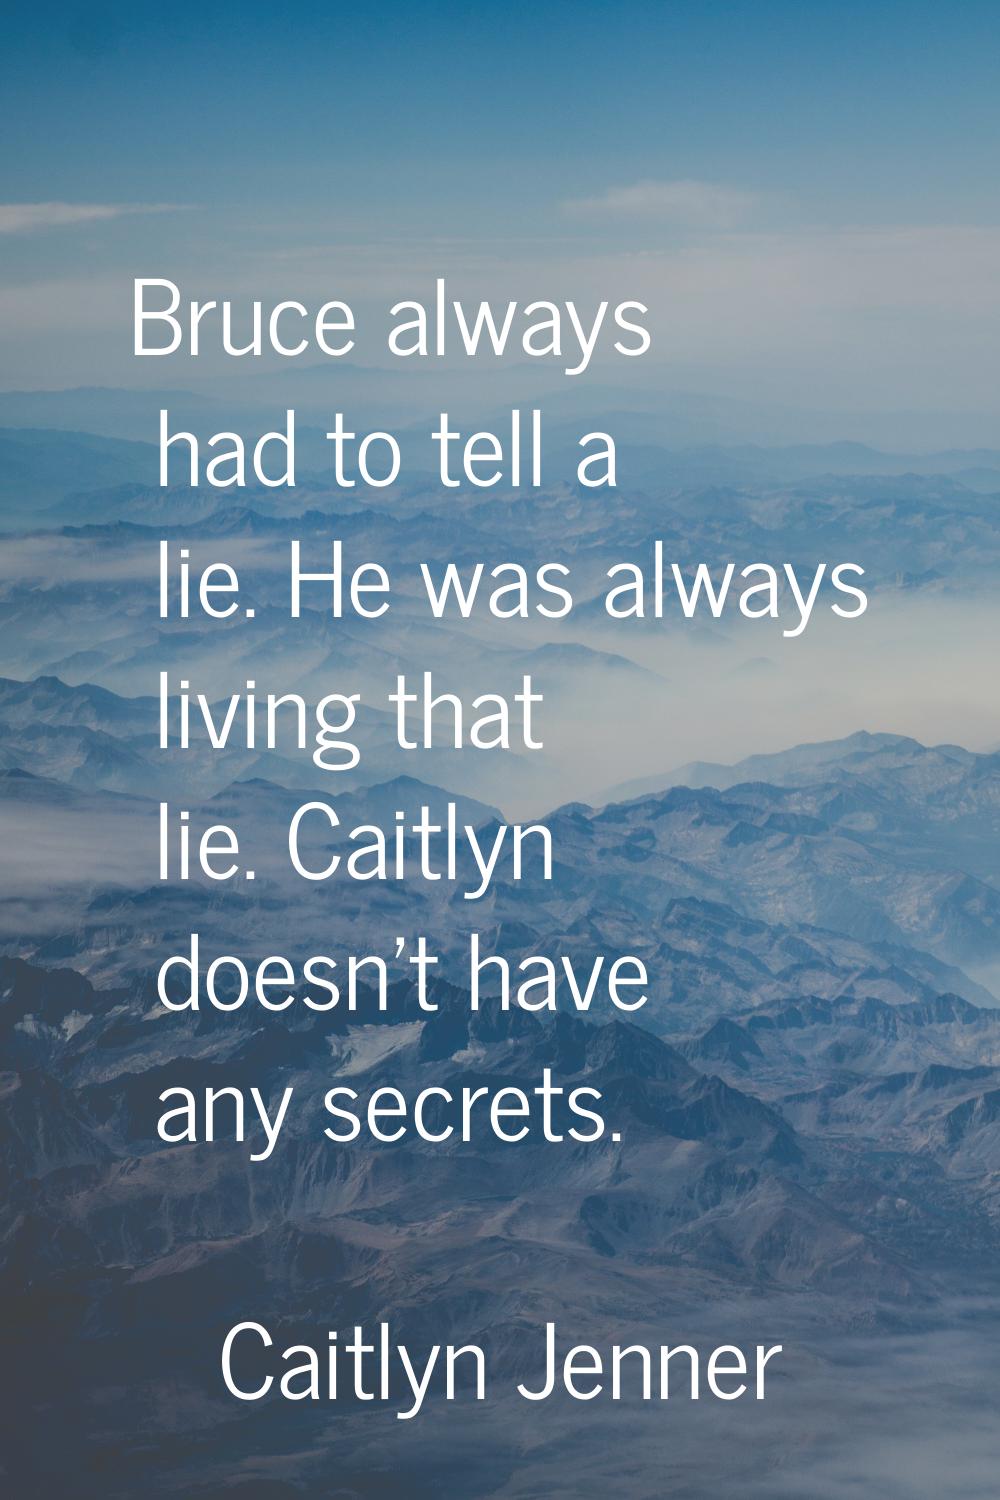 Bruce always had to tell a lie. He was always living that lie. Caitlyn doesn't have any secrets.